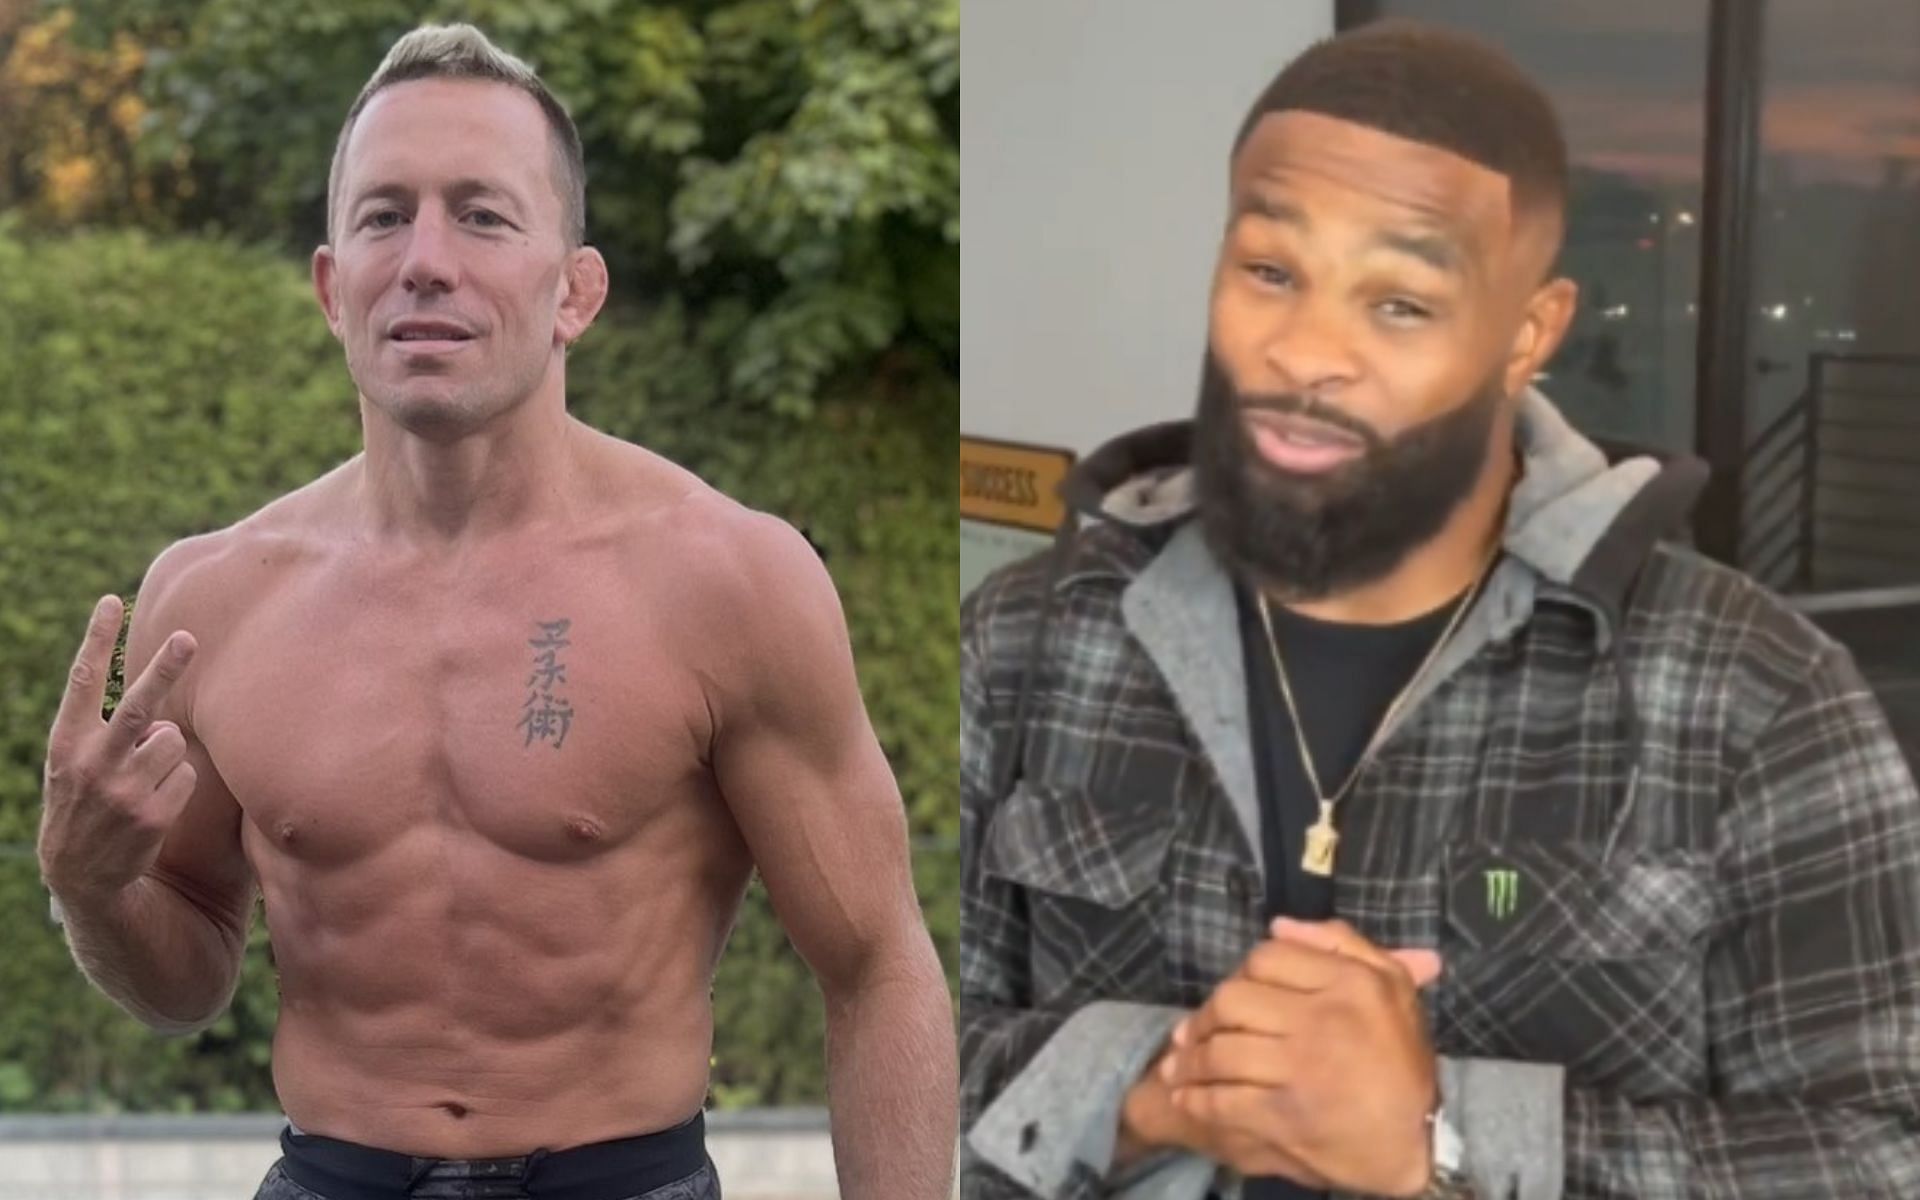 Tyron Woodley [Right] says that he offered Georges St-Pierre [Left] a lot of money to fight him [Image courtesy: @GeorgesStPierre and @TWoodley - X]